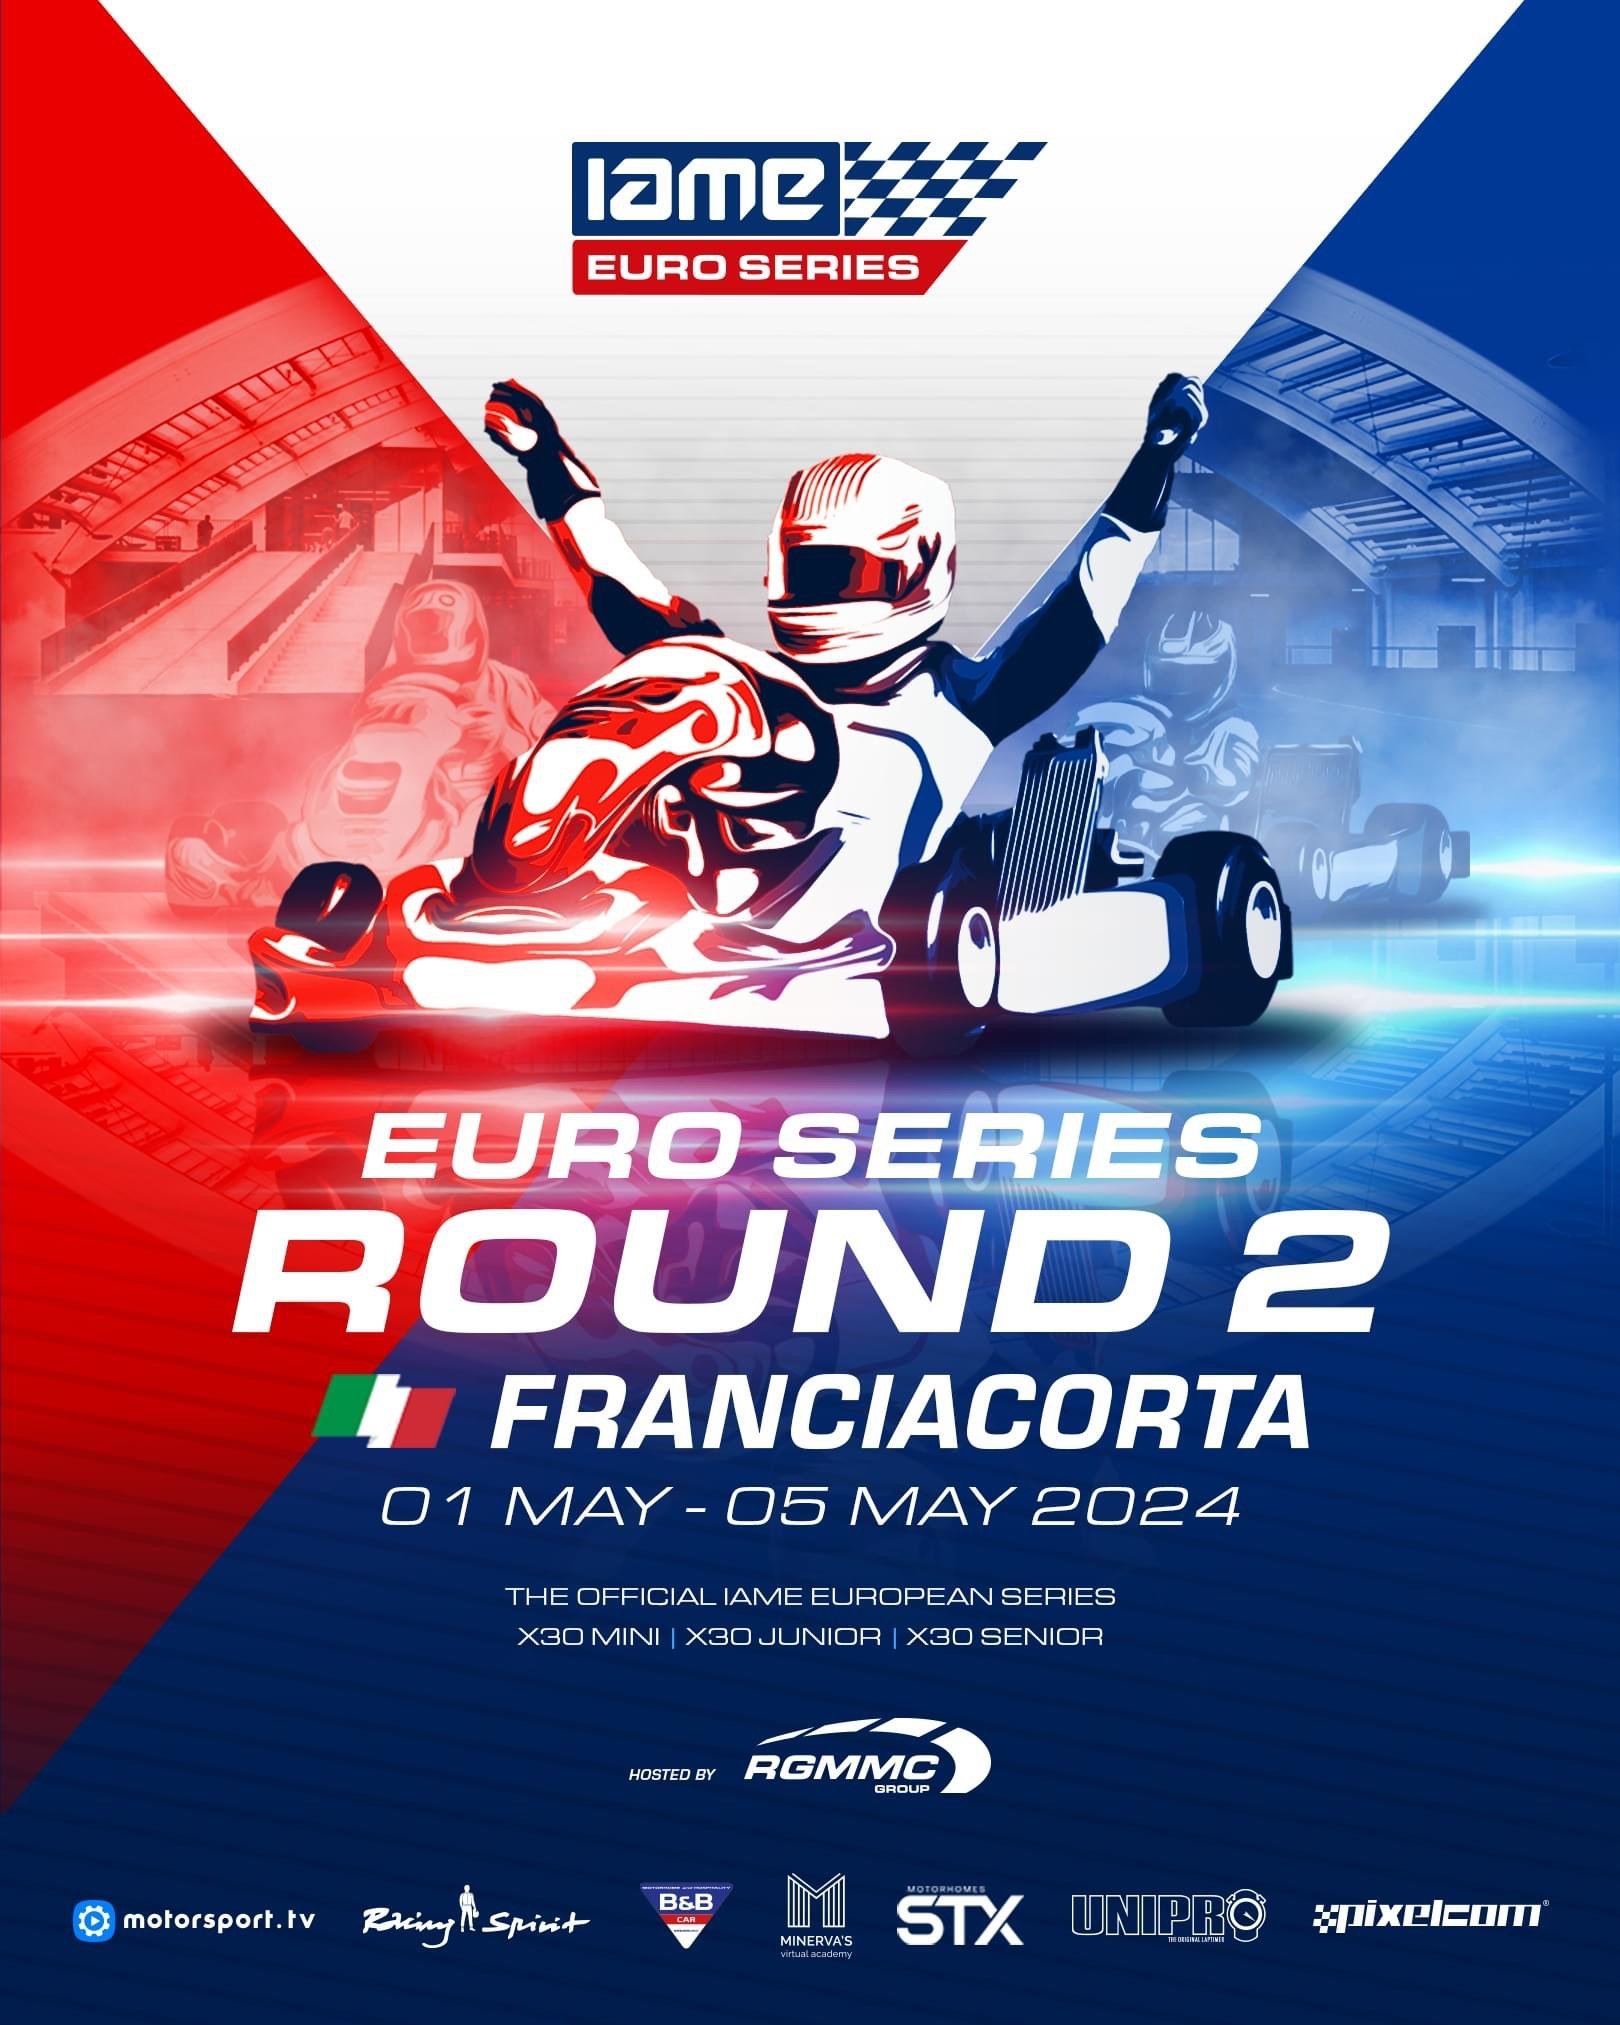 Get Ready for the Euro 2 - Franciacorta: The Ultimate Karting Experience!